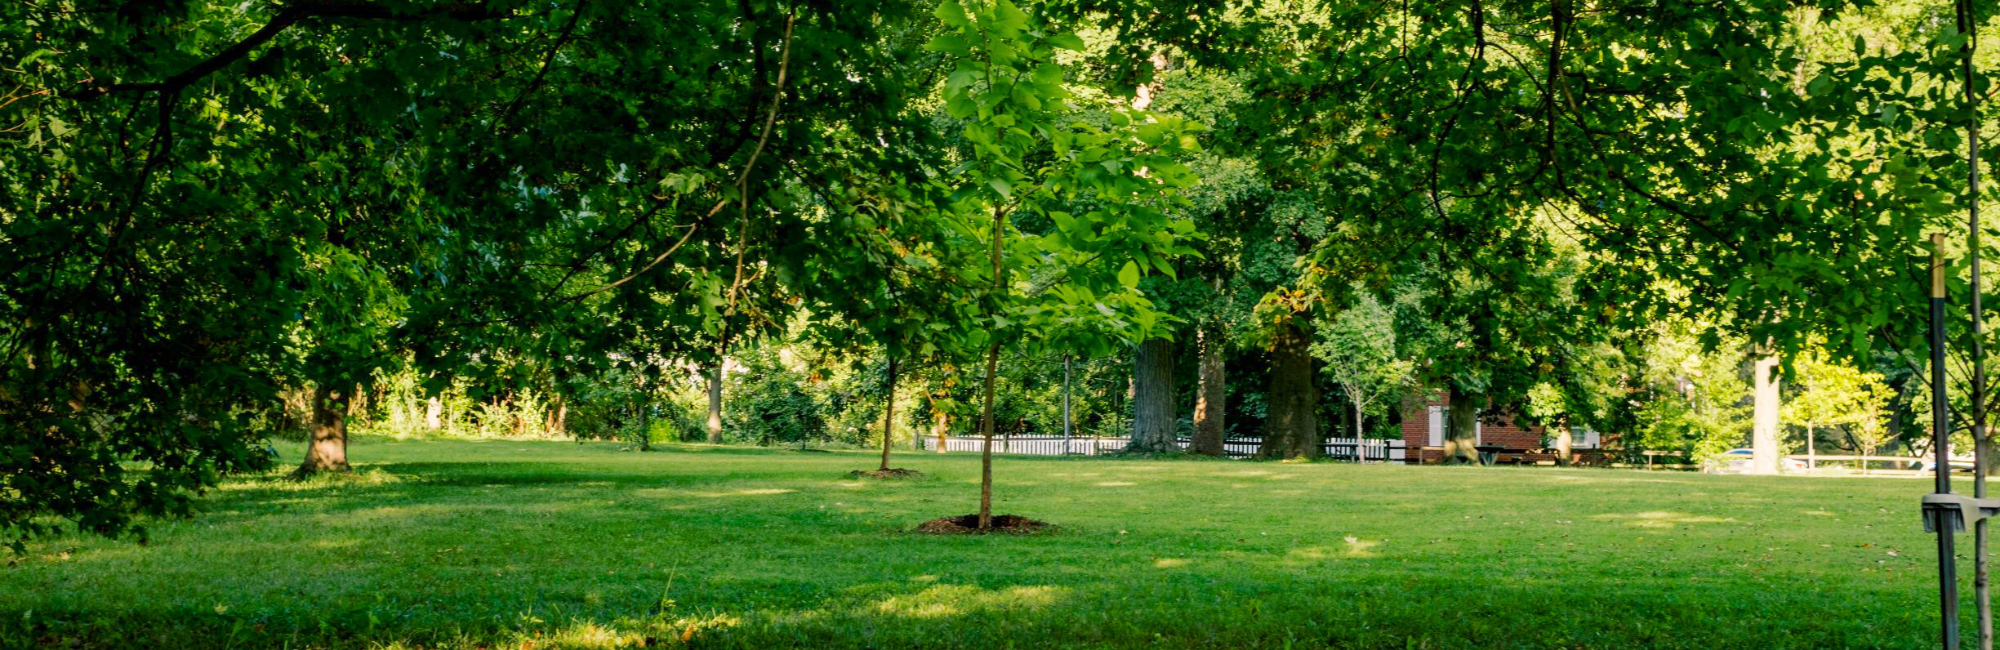 Green area in park with playground in distance